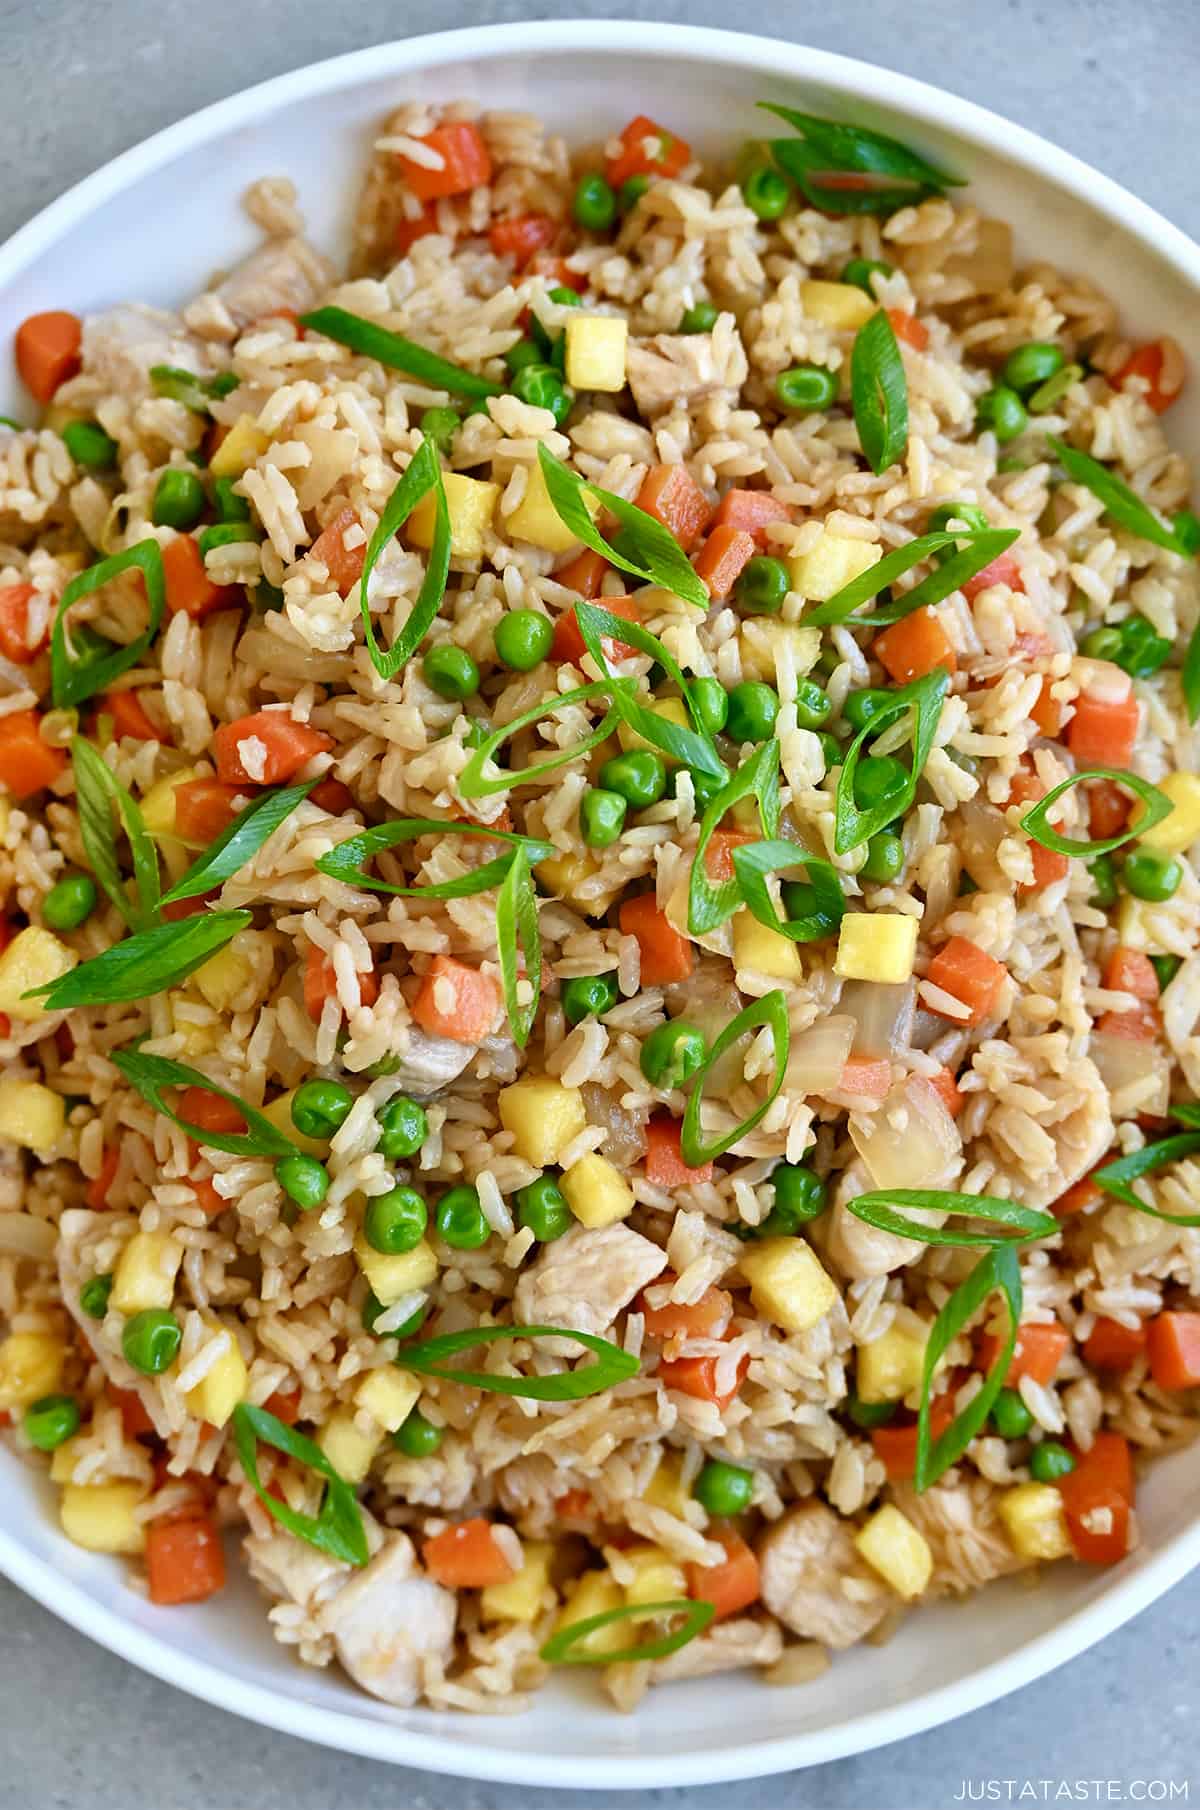 Pineapple chicken fried rice with peas and carrots in a white serving bowl.